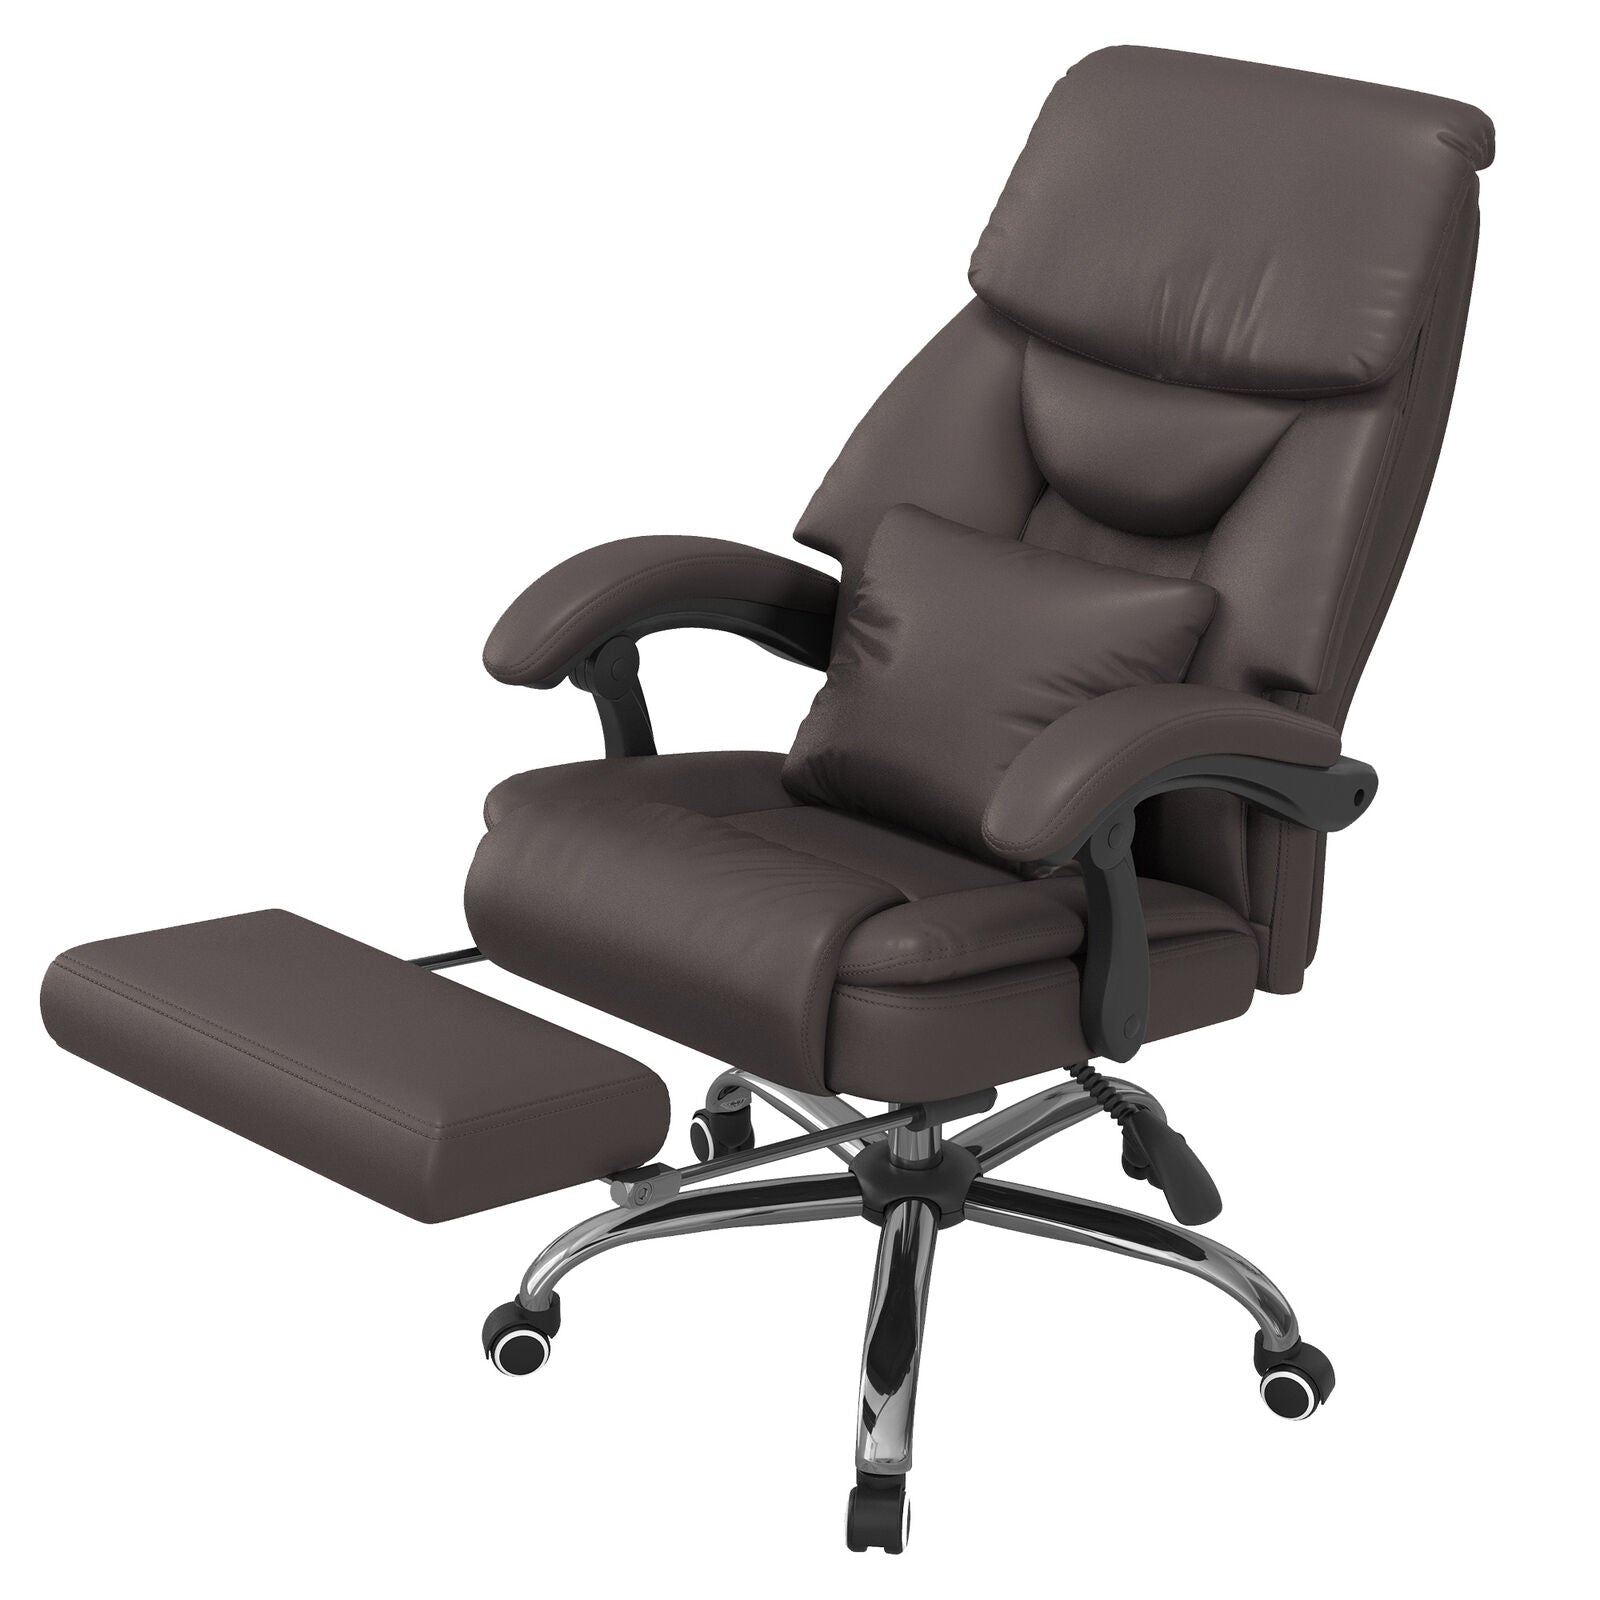 Office Chair- Curved Backrest Desk Chair